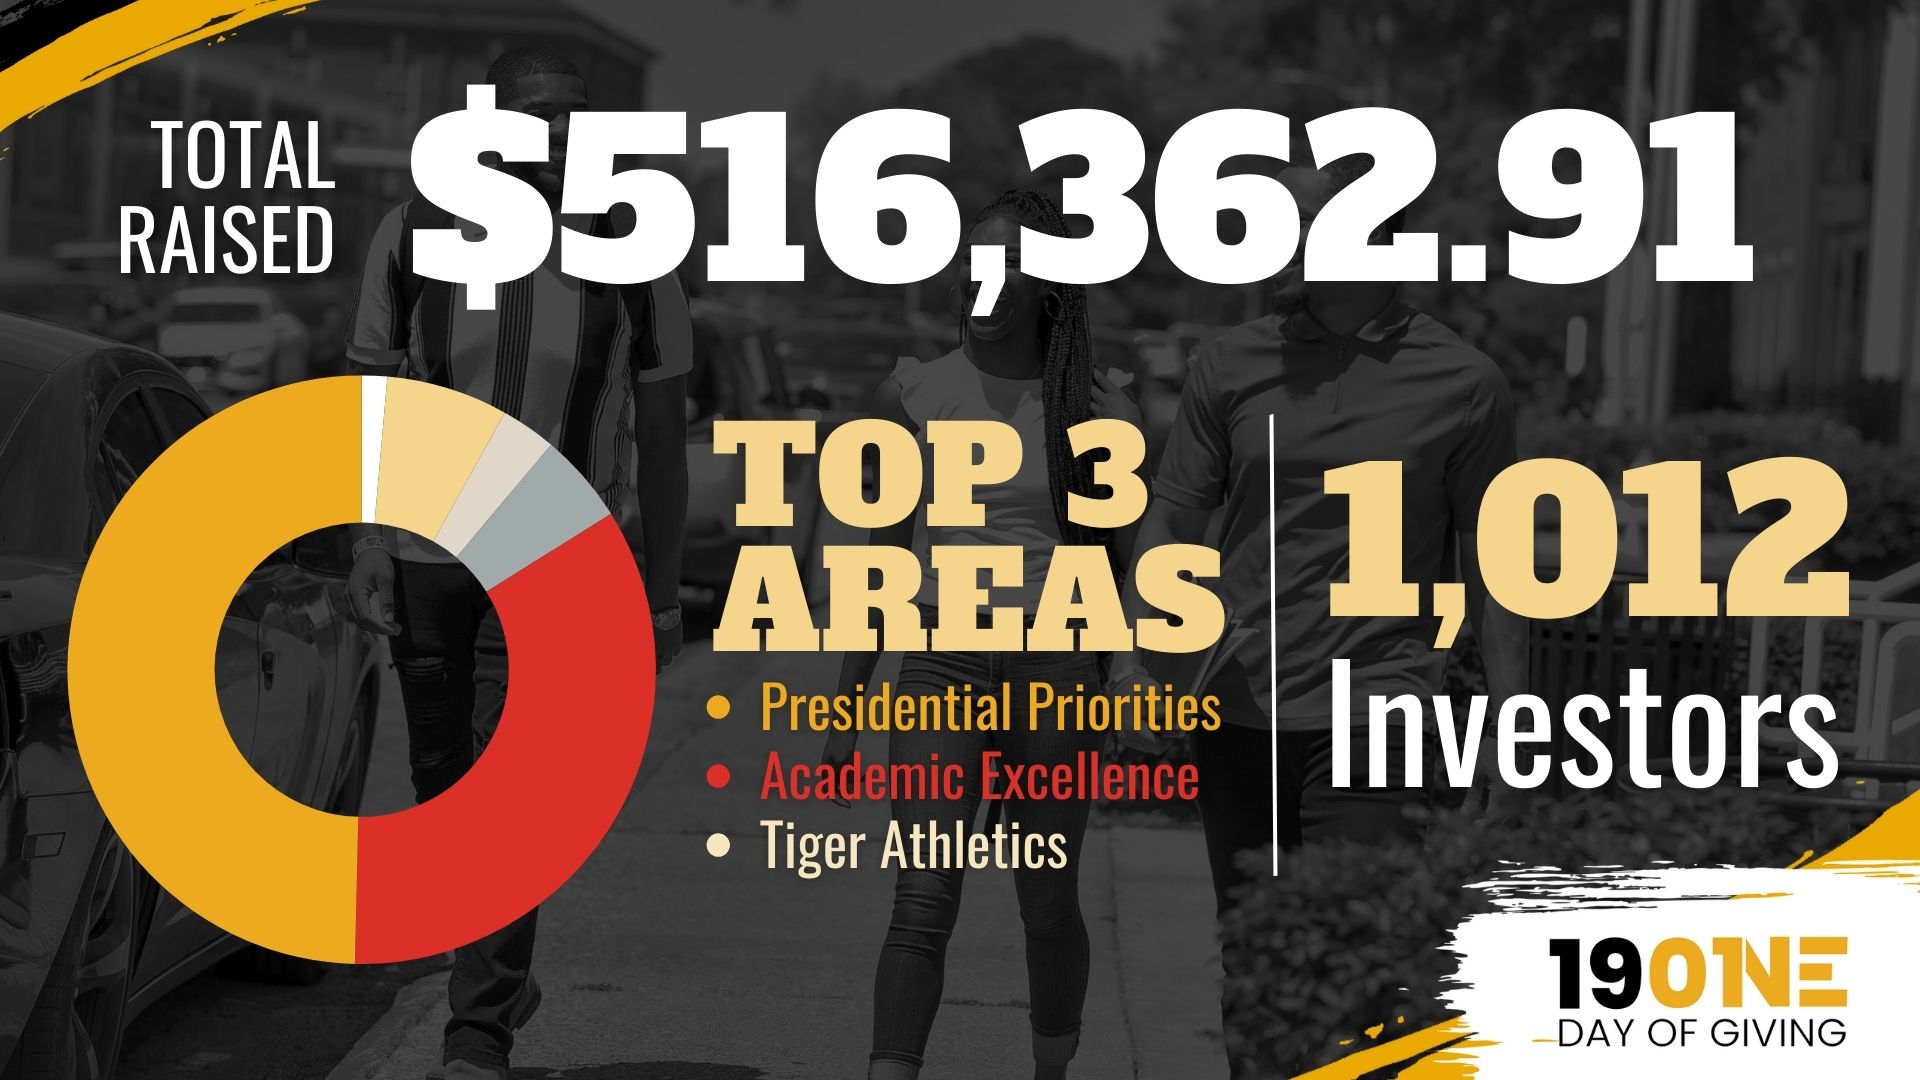 Grambling State University Breaks Fundraising Goal during 1901 Day of Giving campaign